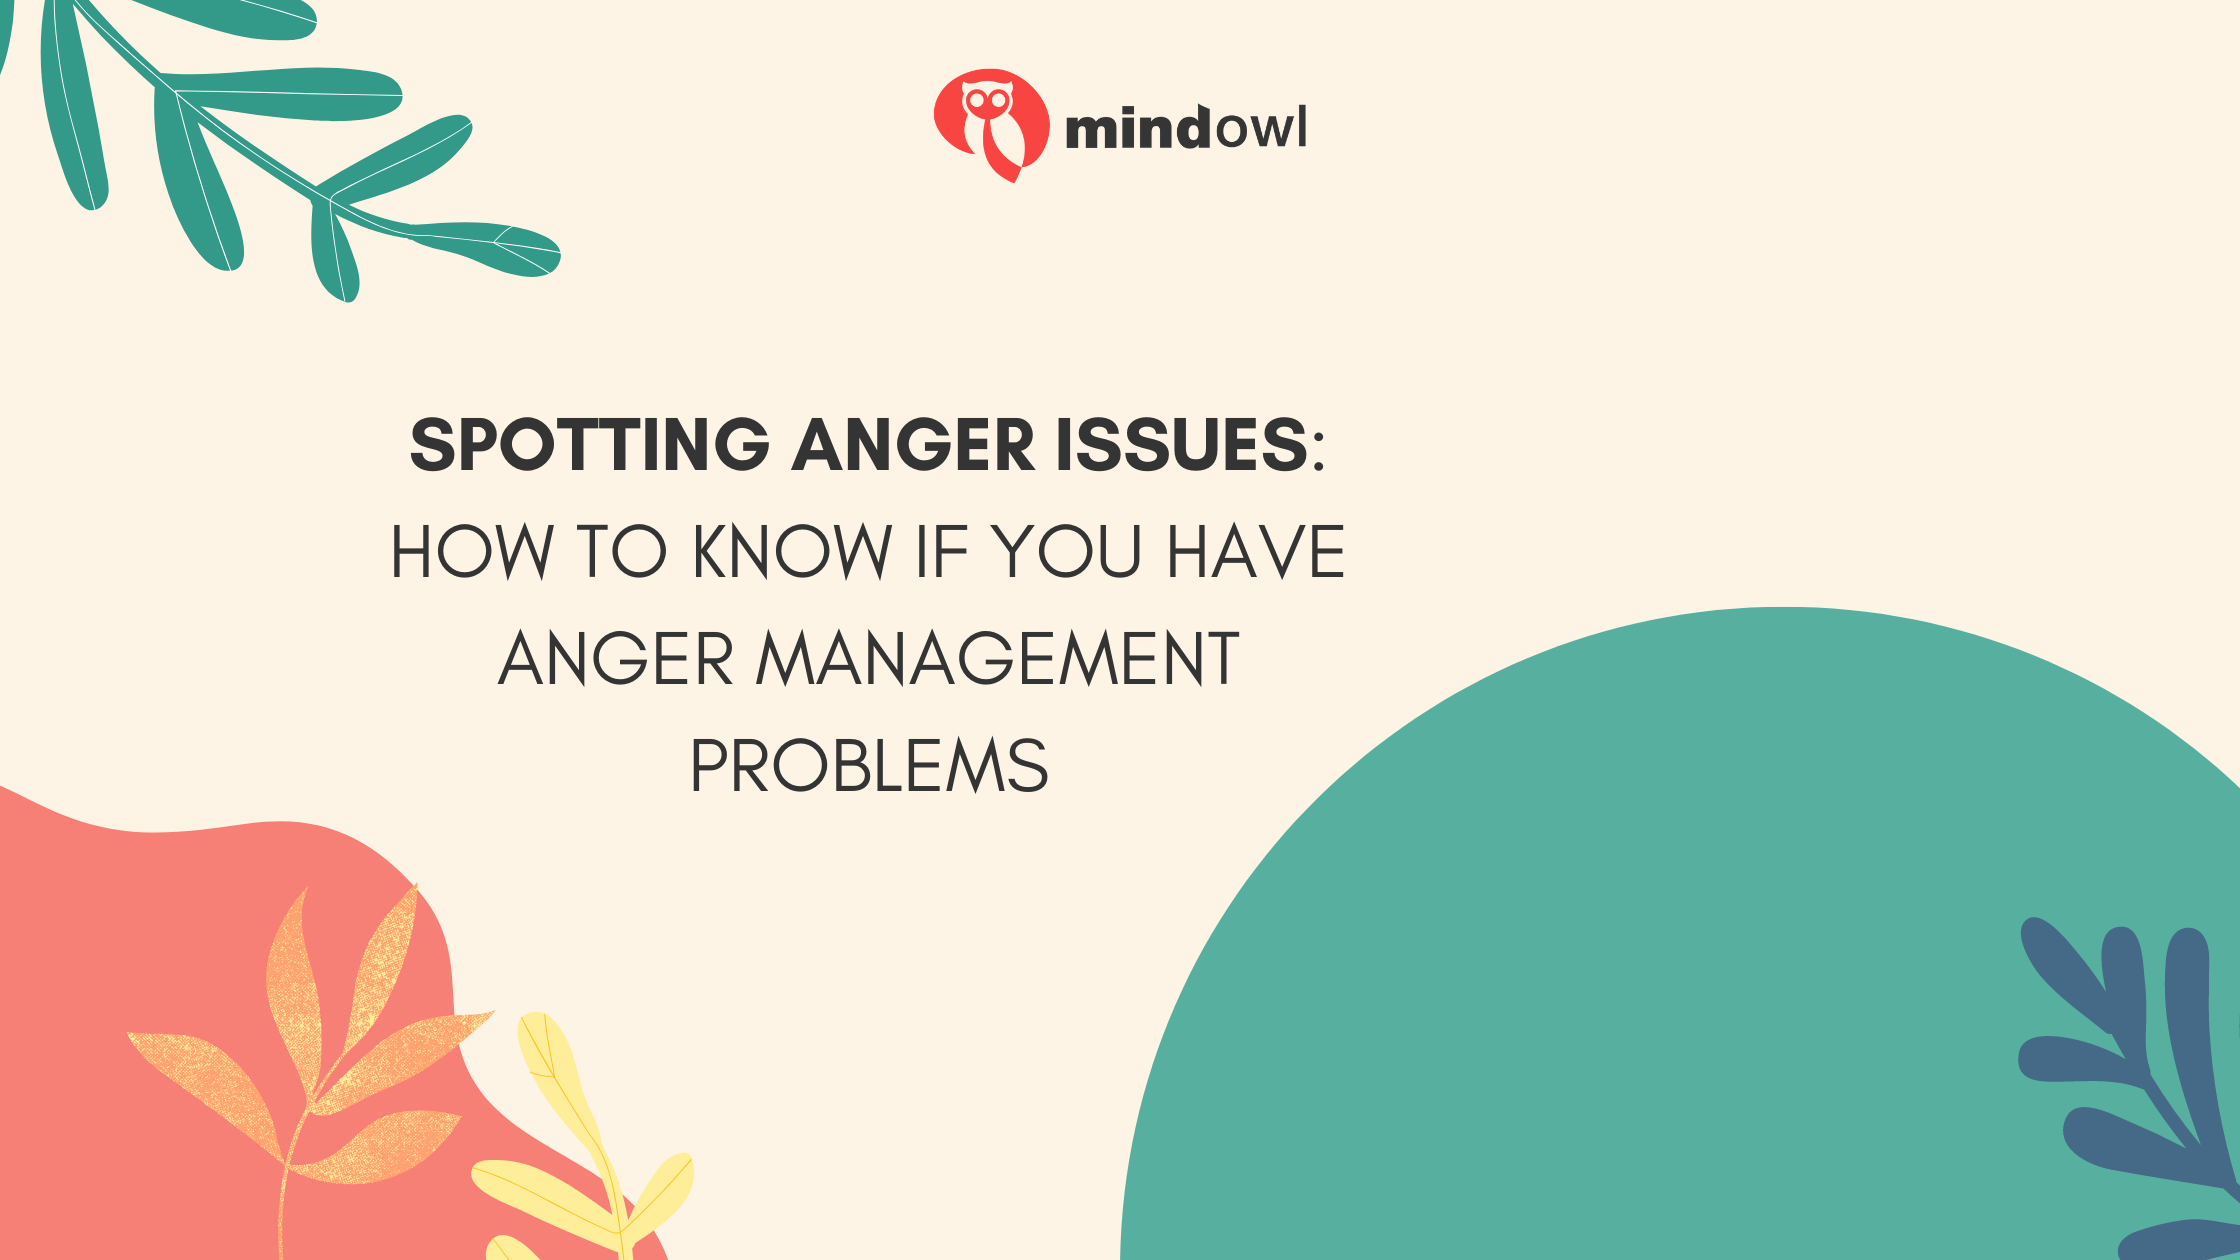 Spotting Anger Issues: How To Know If You Have Anger Management Problems